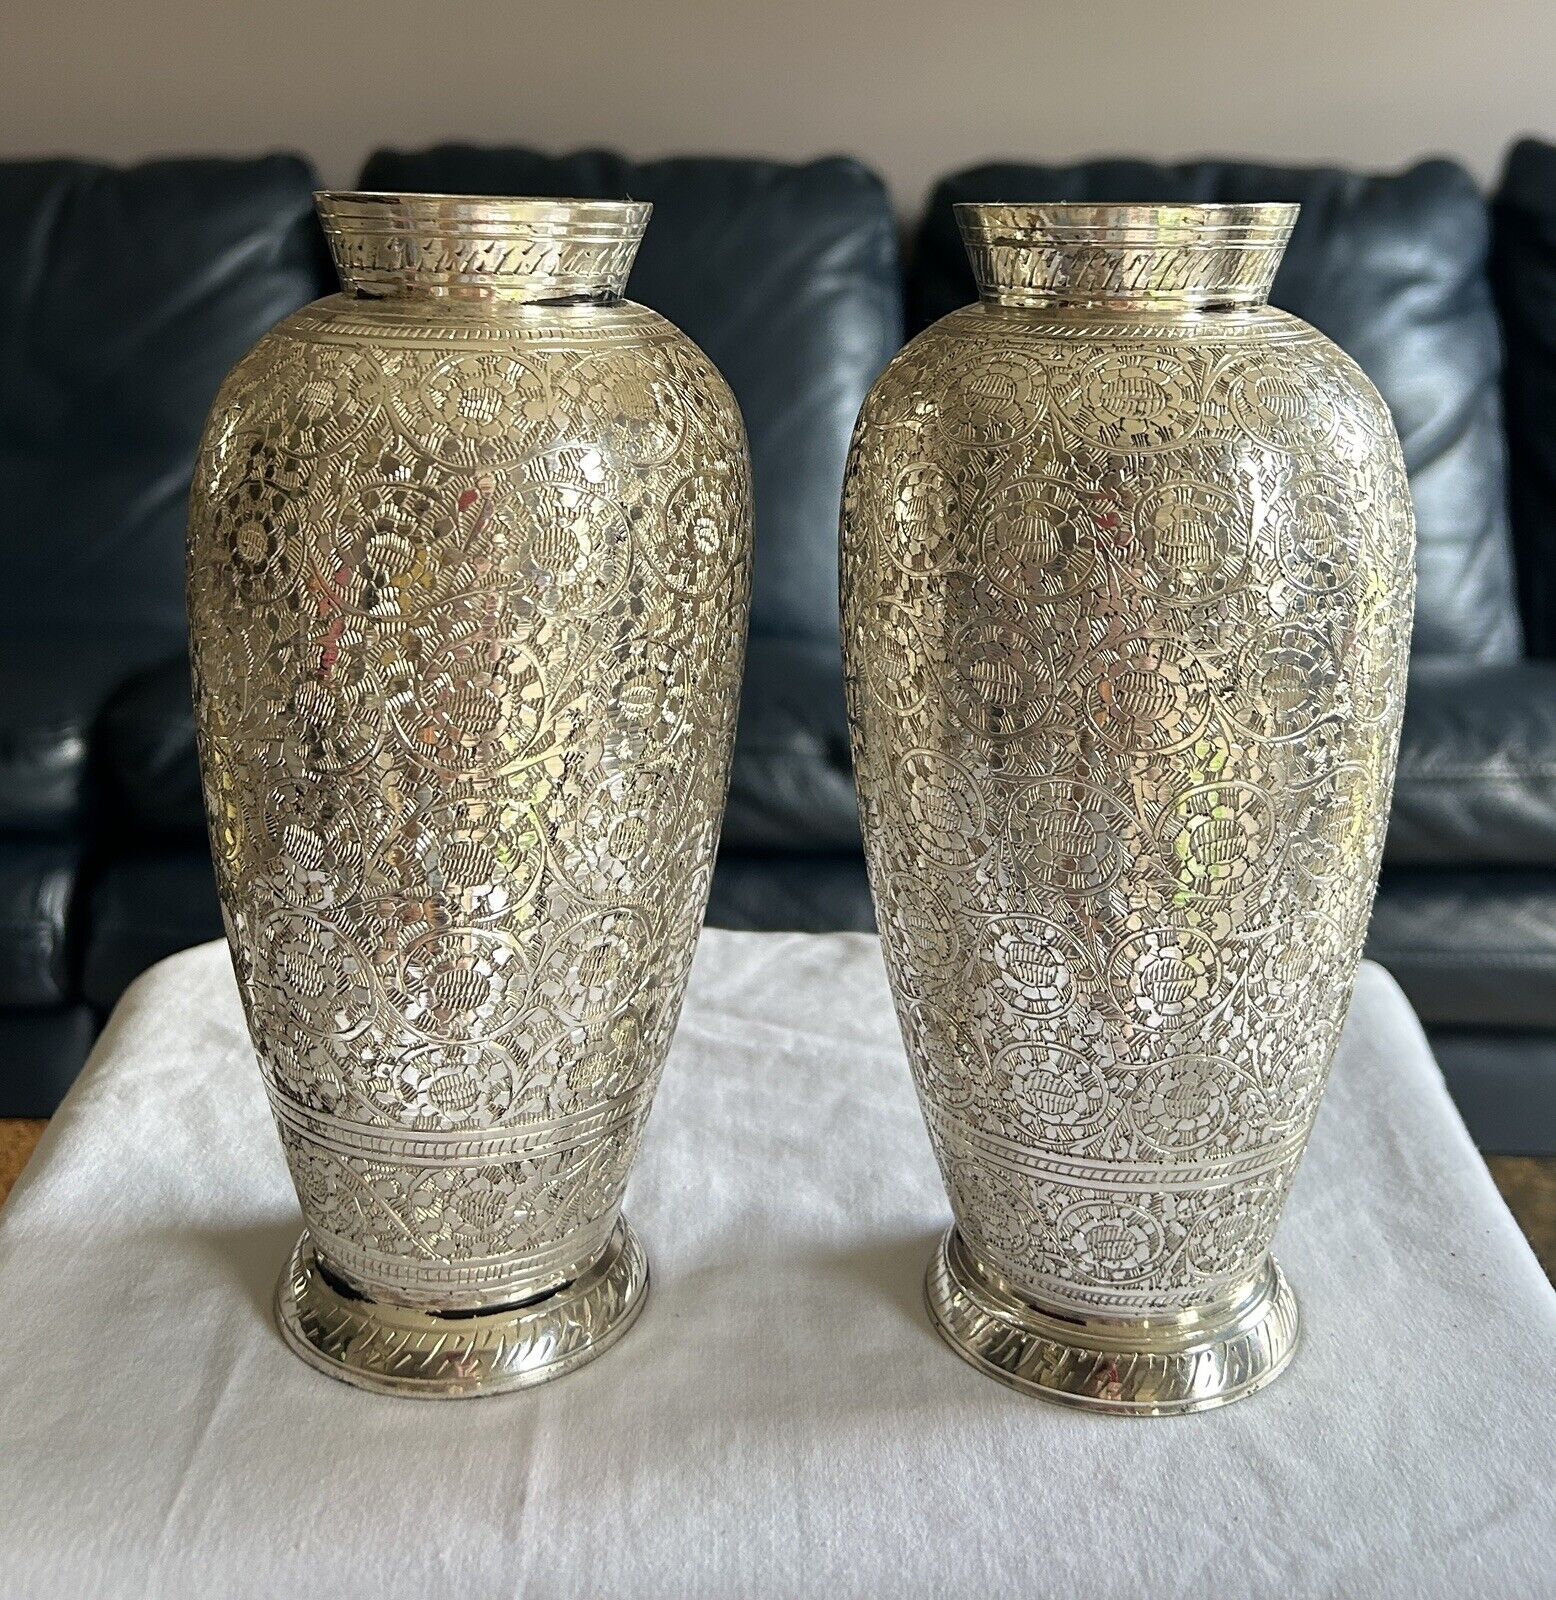 2 Antique Easter Silver Vases.  Beautiful Hand Tooled Decorated